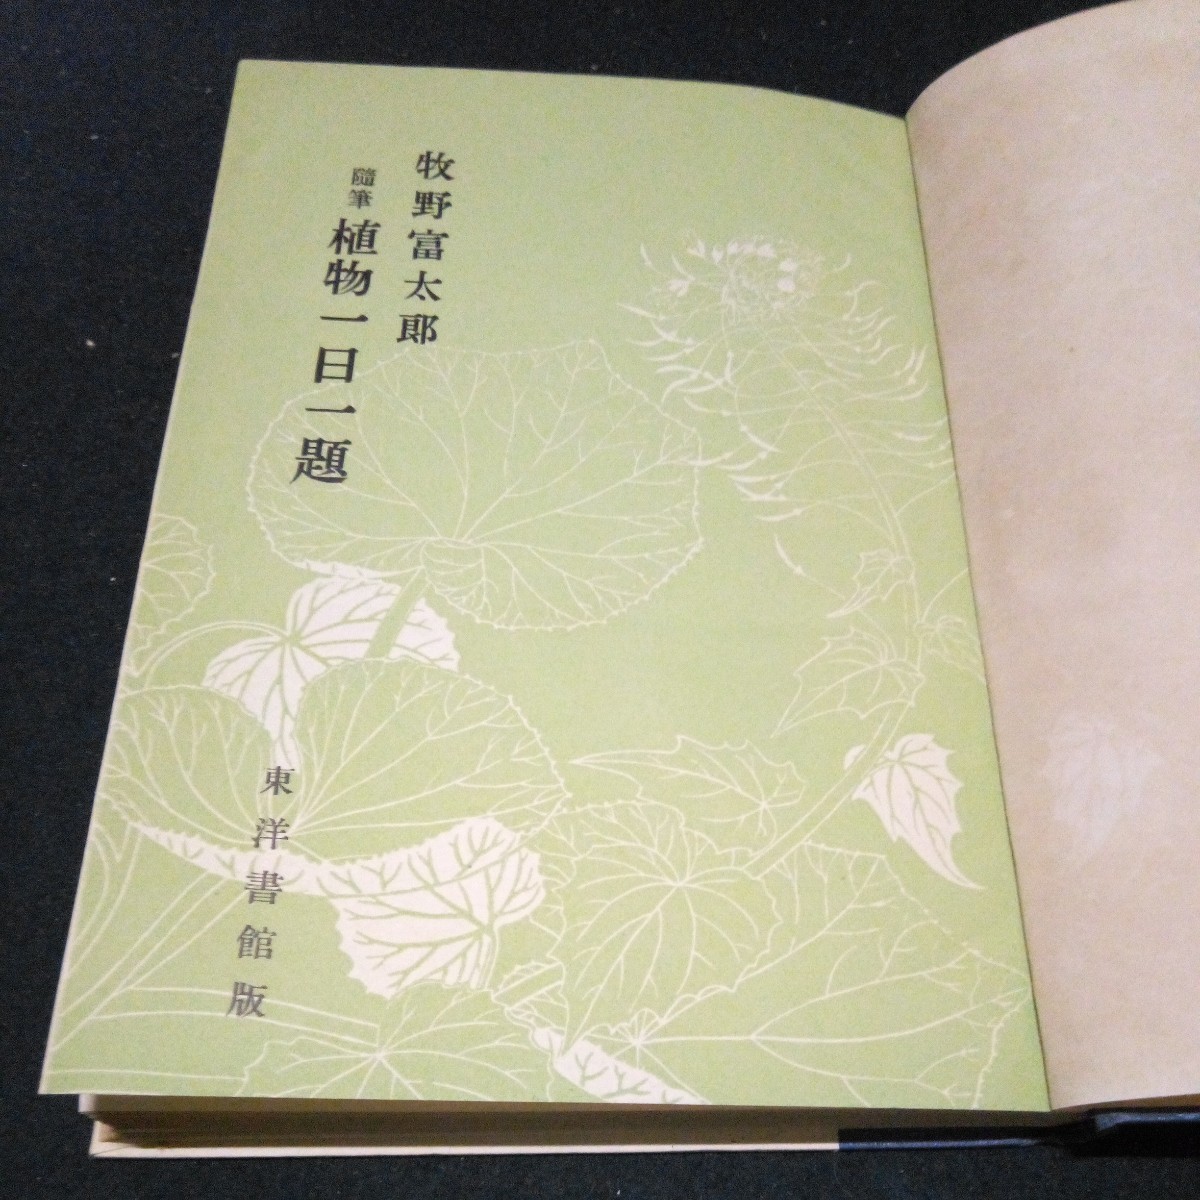  old book plant an educational institution ..... Taro [ miscellaneous writings plant one day one .] higashi foreign book pavilion Showa era 28 year issue the first version 